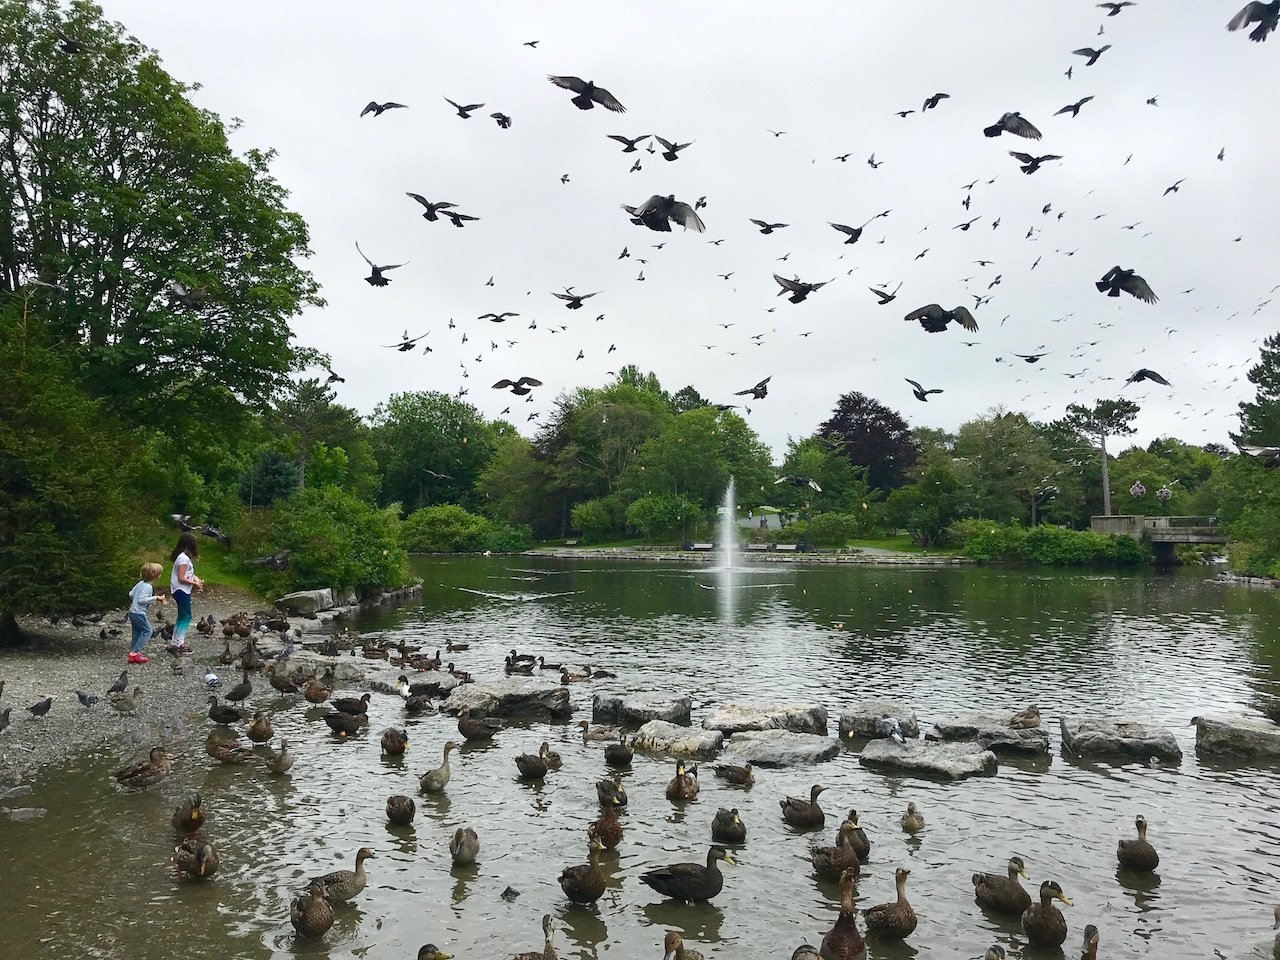 Things to do in St. John's: Feed the ducks